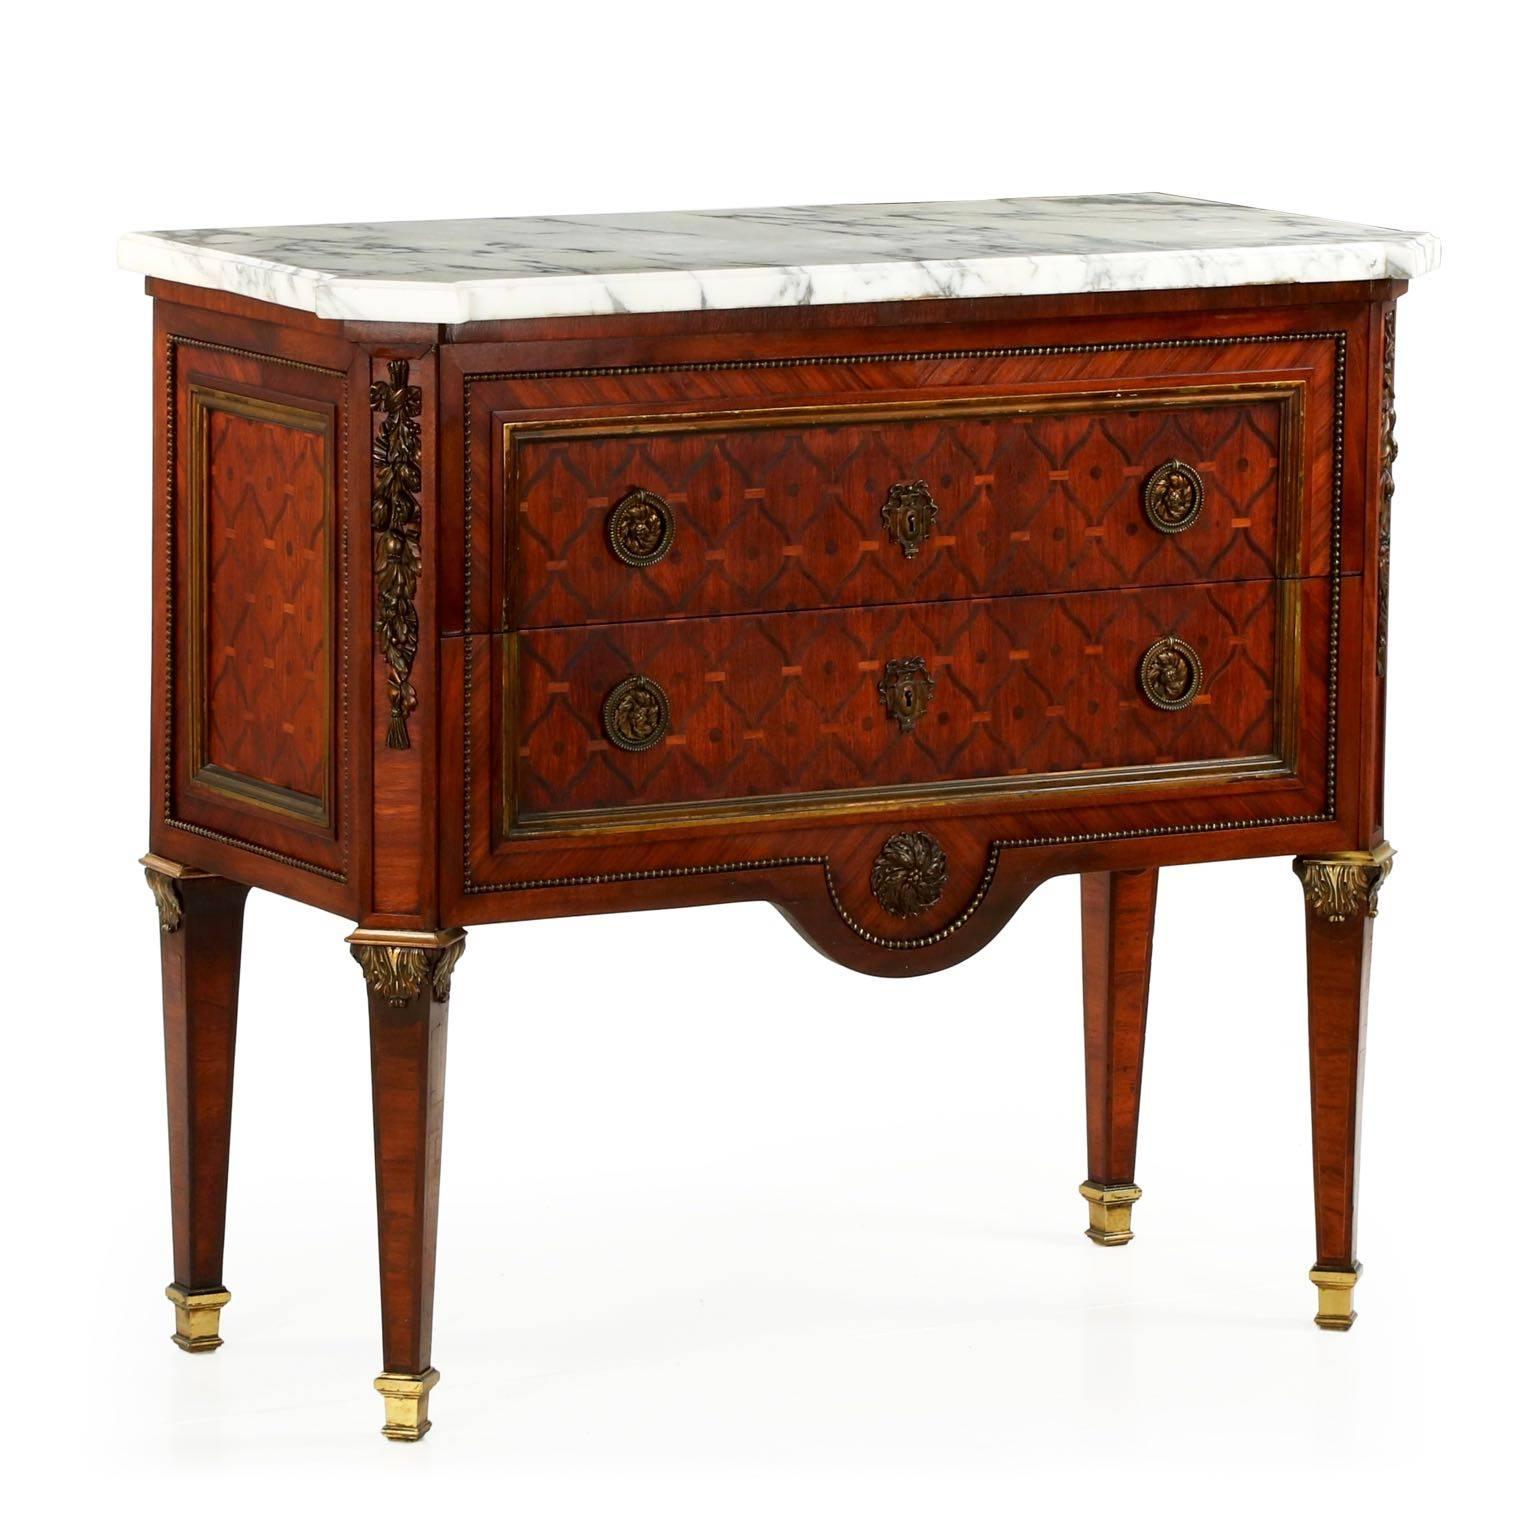 Of a most fine quality, this commode was crafted during the last quarter of the 19th century during the Bell Epoqué. Distinctly square and severe in angles, the commode is a statement of geometry and competing lines. A repeating squared parquetry